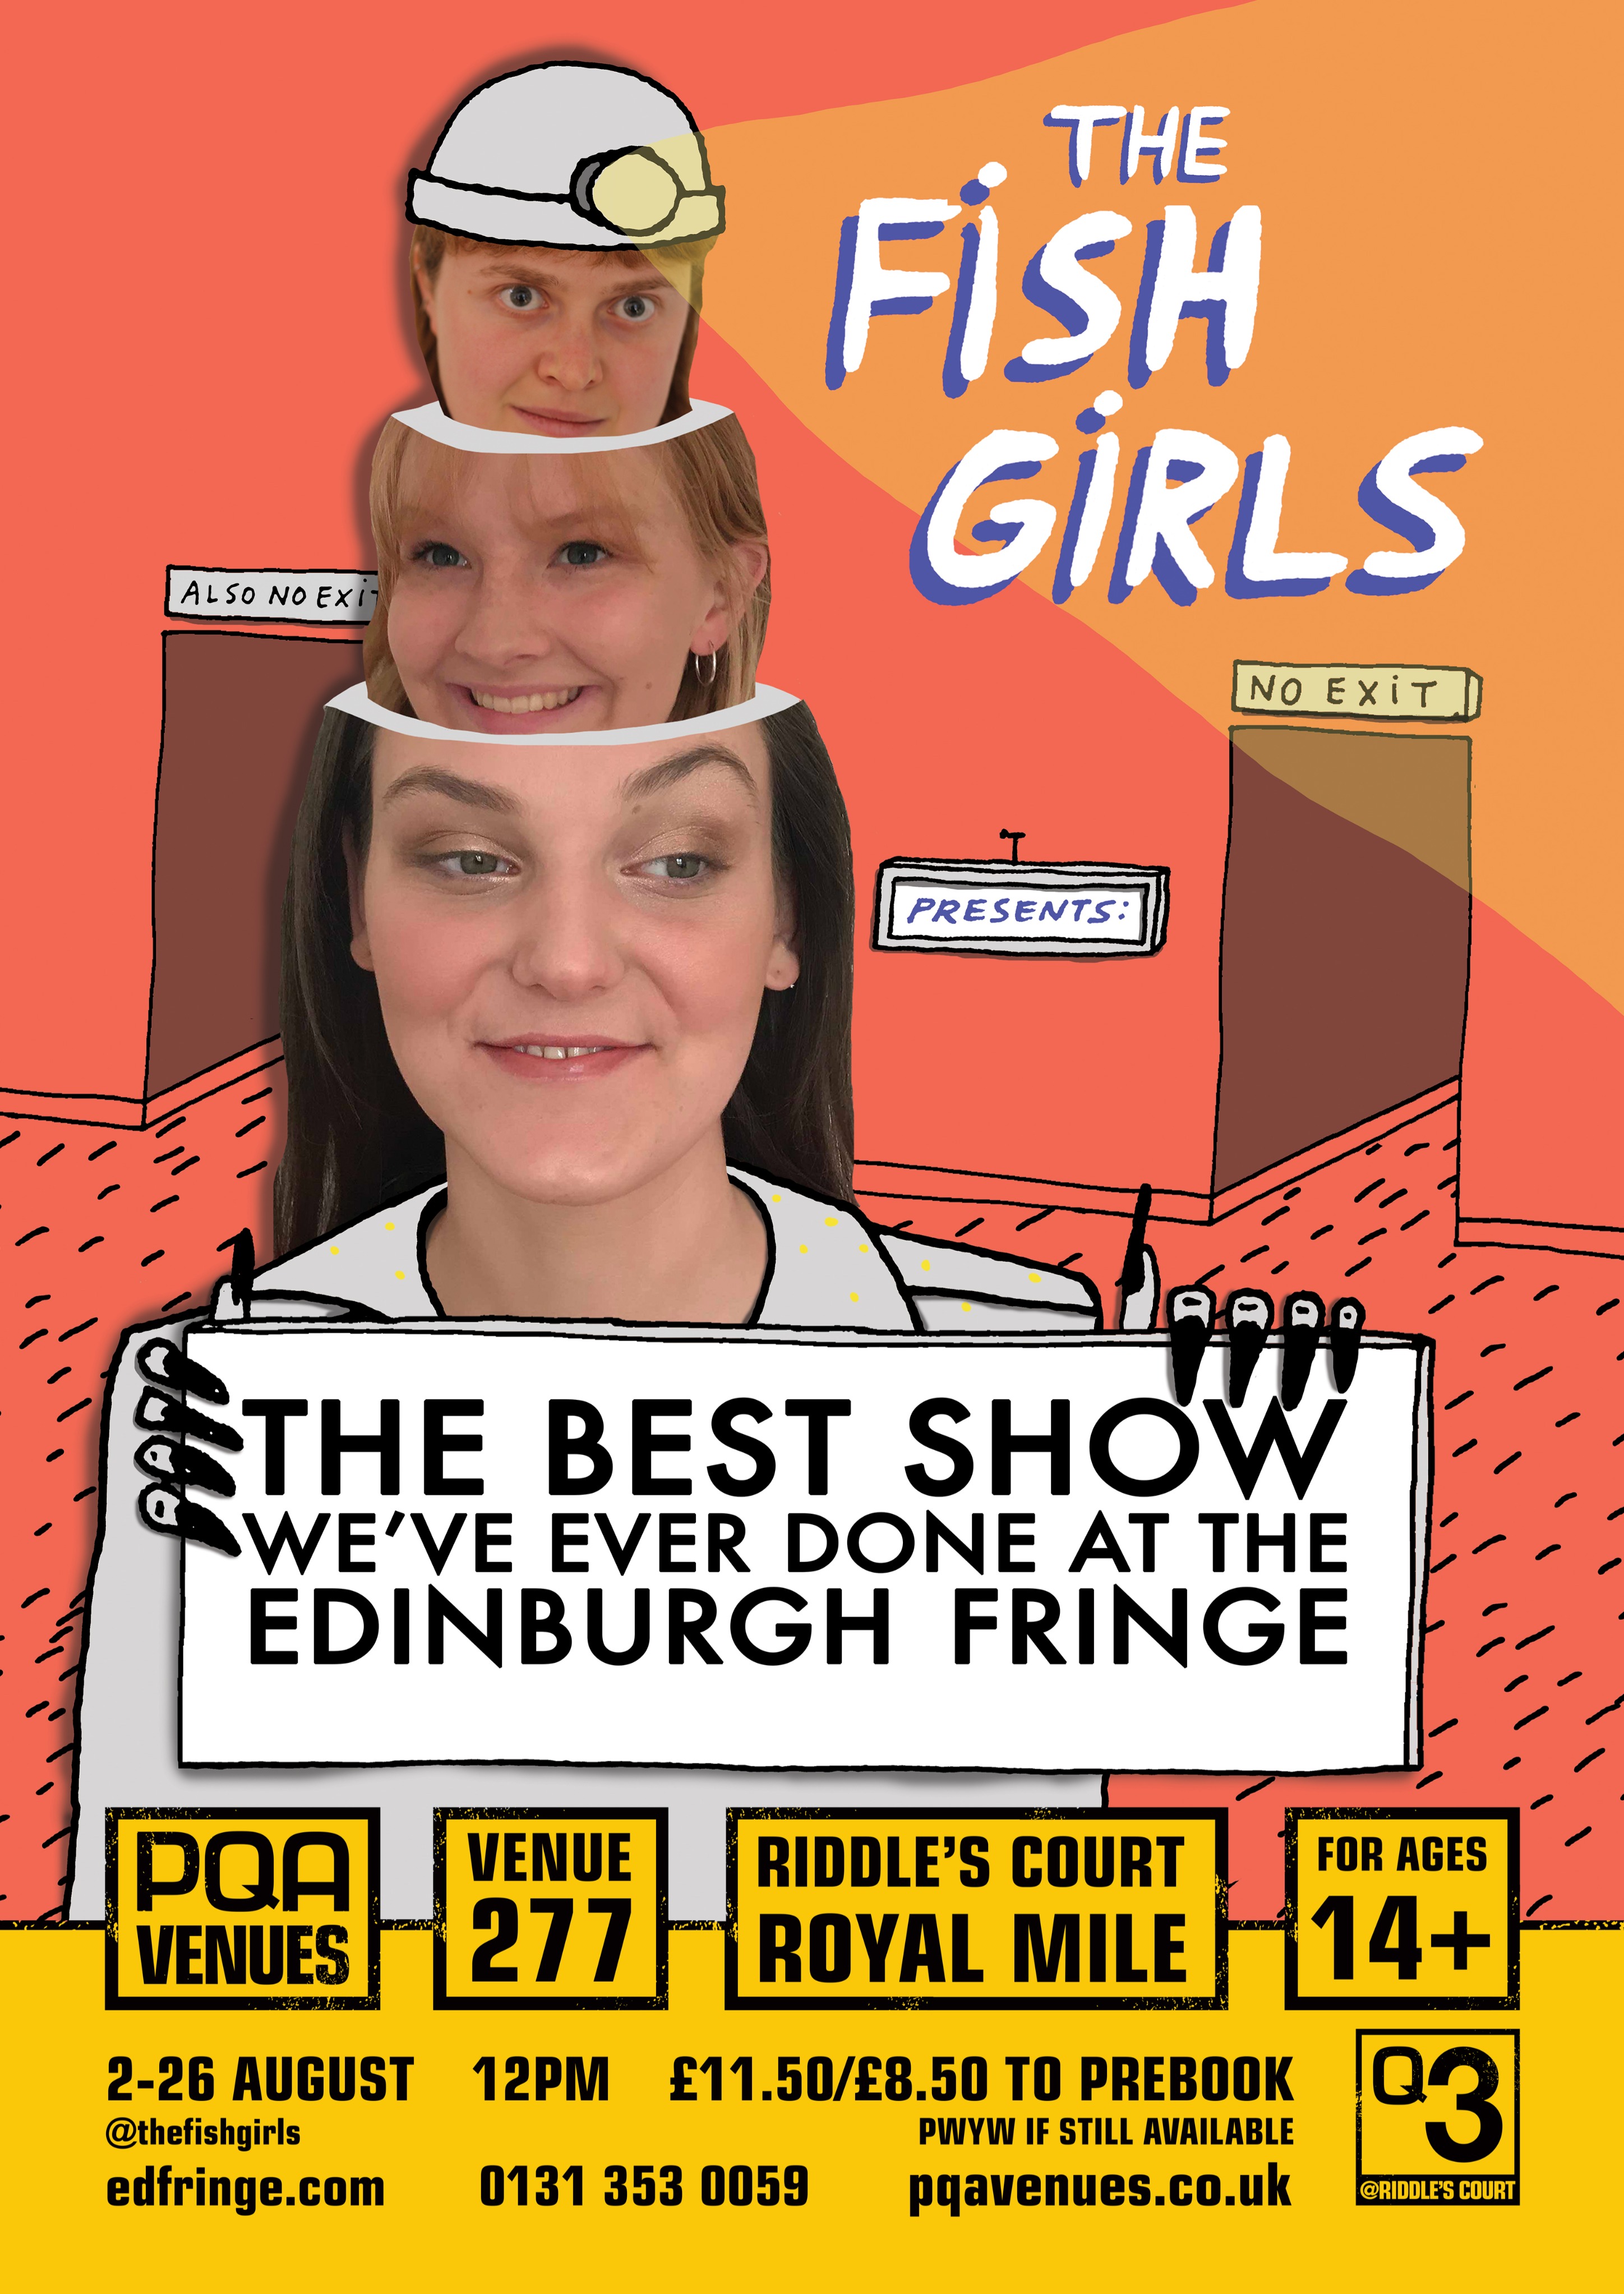 The poster for The Best Show We've Ever Done At The Edinburgh Fringe